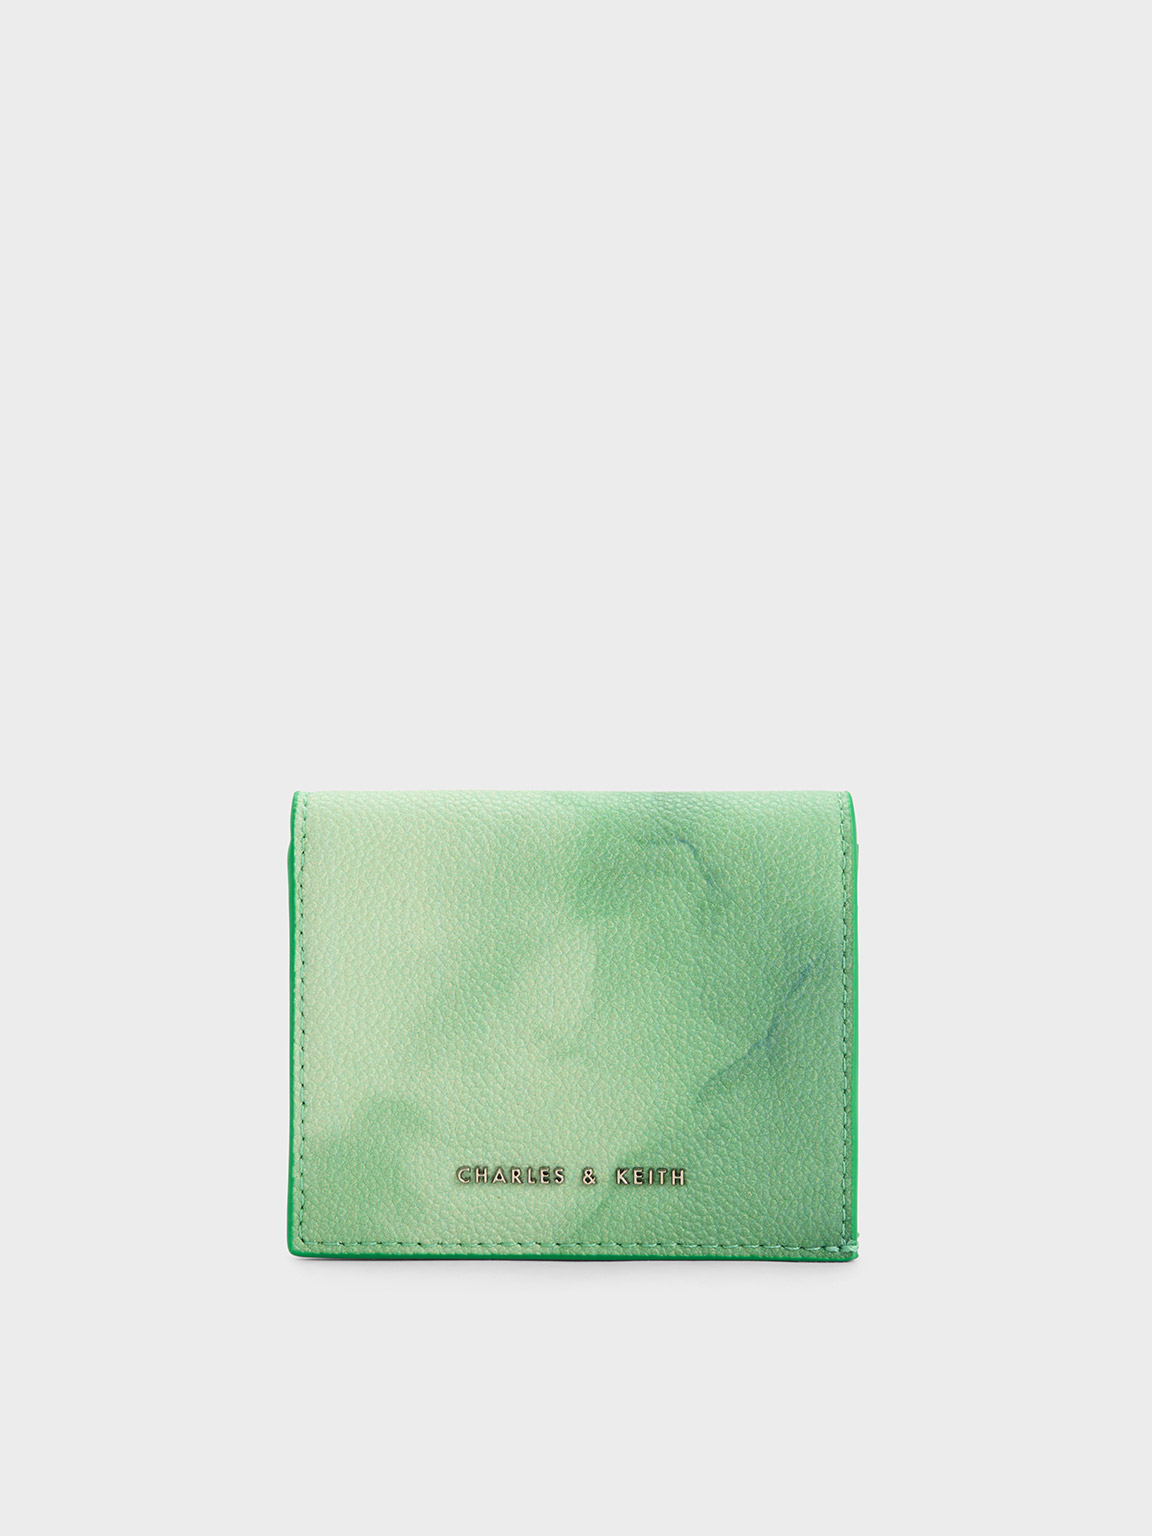 Small Wallet / Mini Wallet, Size XS, Leather, In: Green, Red, Blue, Beige, Brown, Black, Custom Engraving Possible, 105